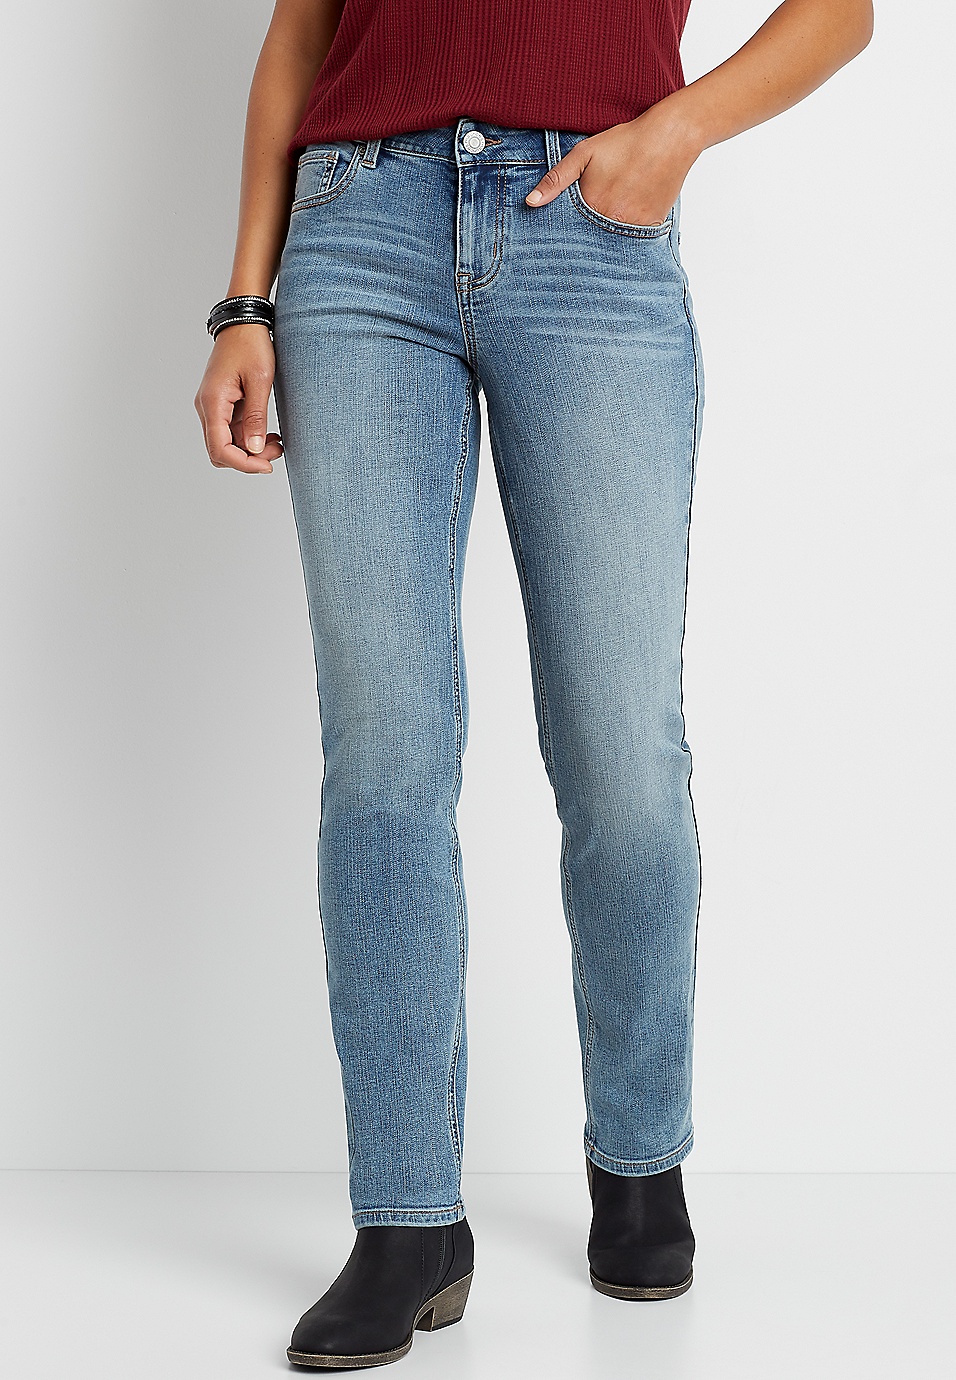 m jeans by maurices™ Classic Straight Mid Rise Jean